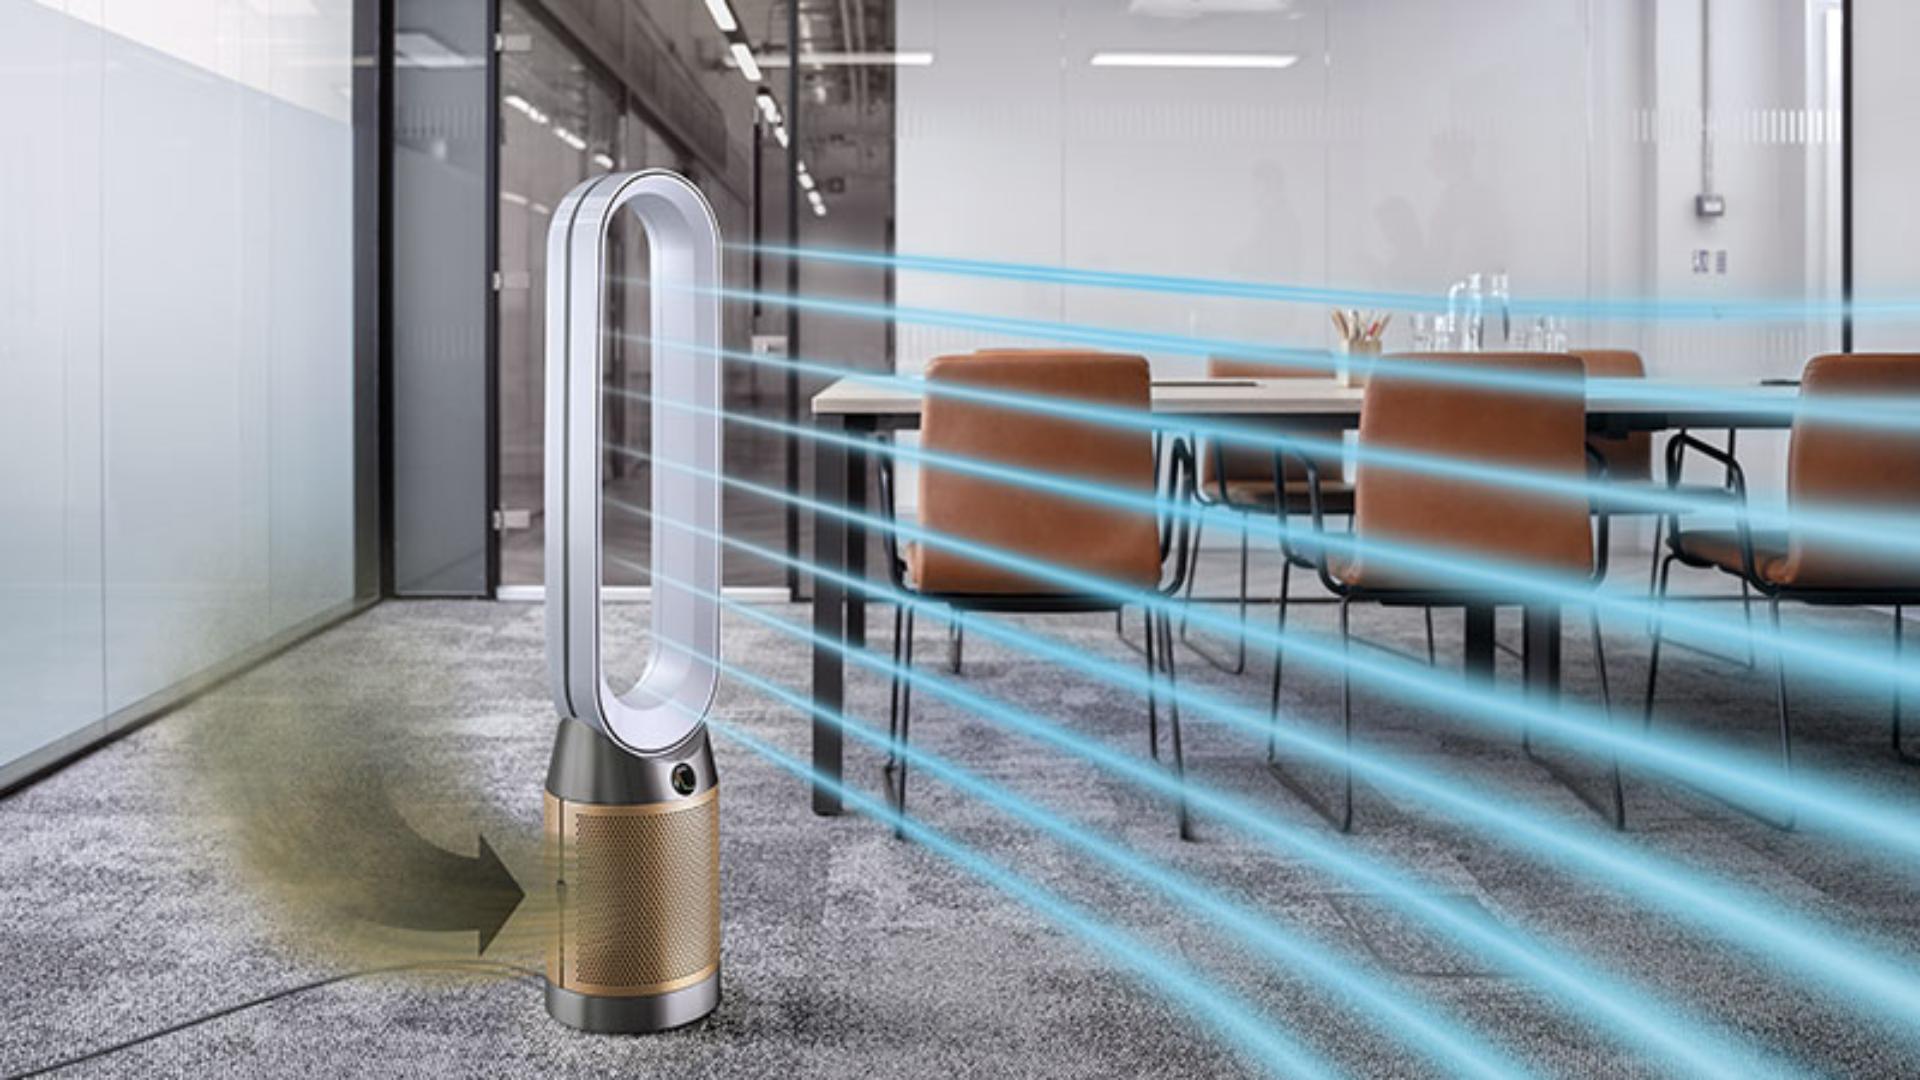 Dyson HEPA Cool Formaldehyde projecting purified air